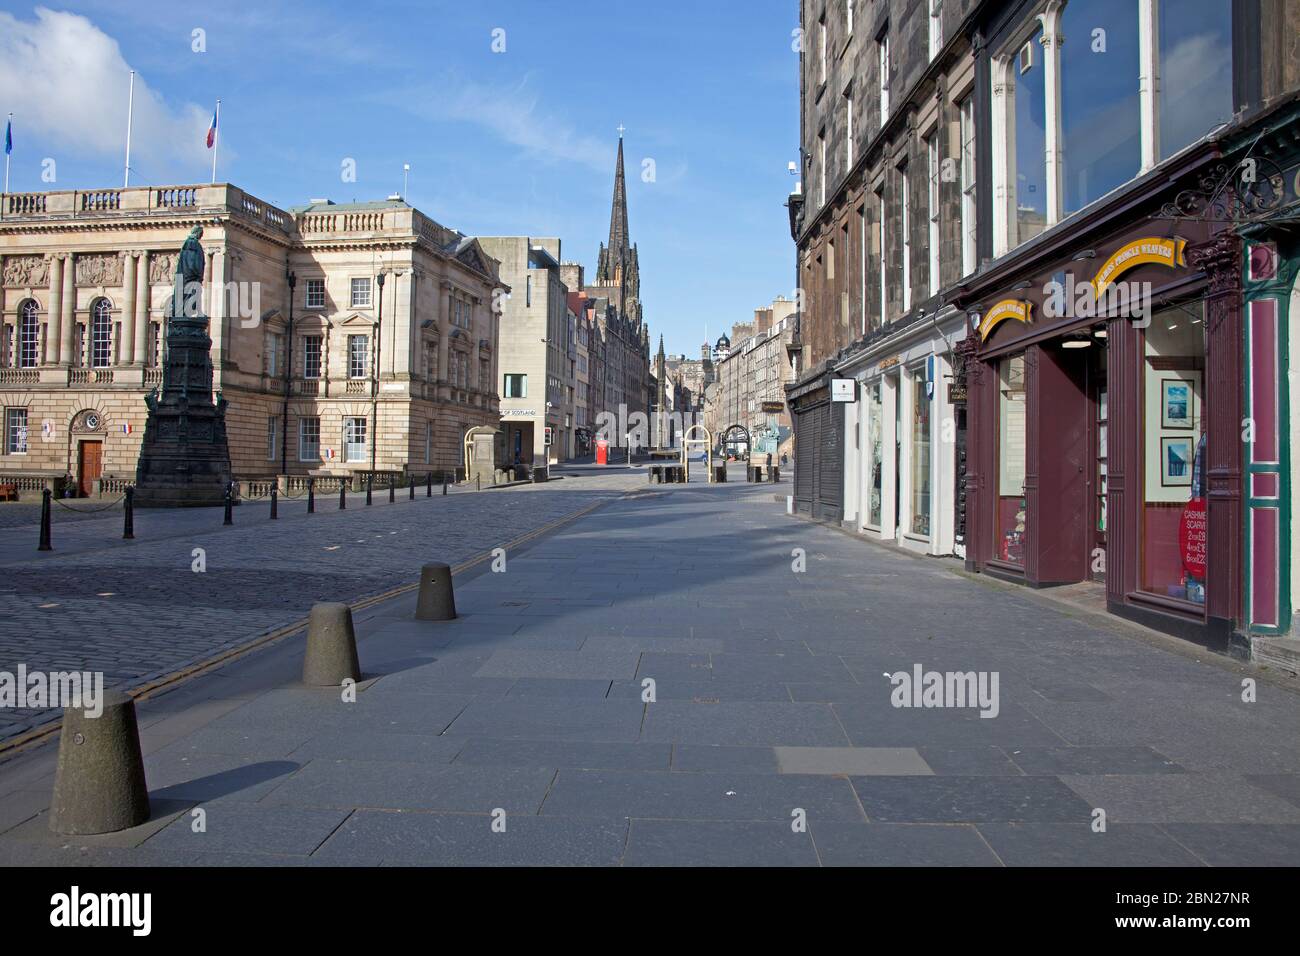 Edinburgh city centre, Scotland, UK. 12th May 2020. Fiftieth day of UK Covid-19 Coronavirus Lockdown, streets and pavements pictured show a touristless city with very little traffic or pedestrians out and about before 9.45am. Pictured the view fromThe Royal Mile up towards The Lawnmarket. Many boarded up pubs which are not expected to open in Scotland until perhaps July. Credit: Arch White/Alamy Live News. Stock Photo